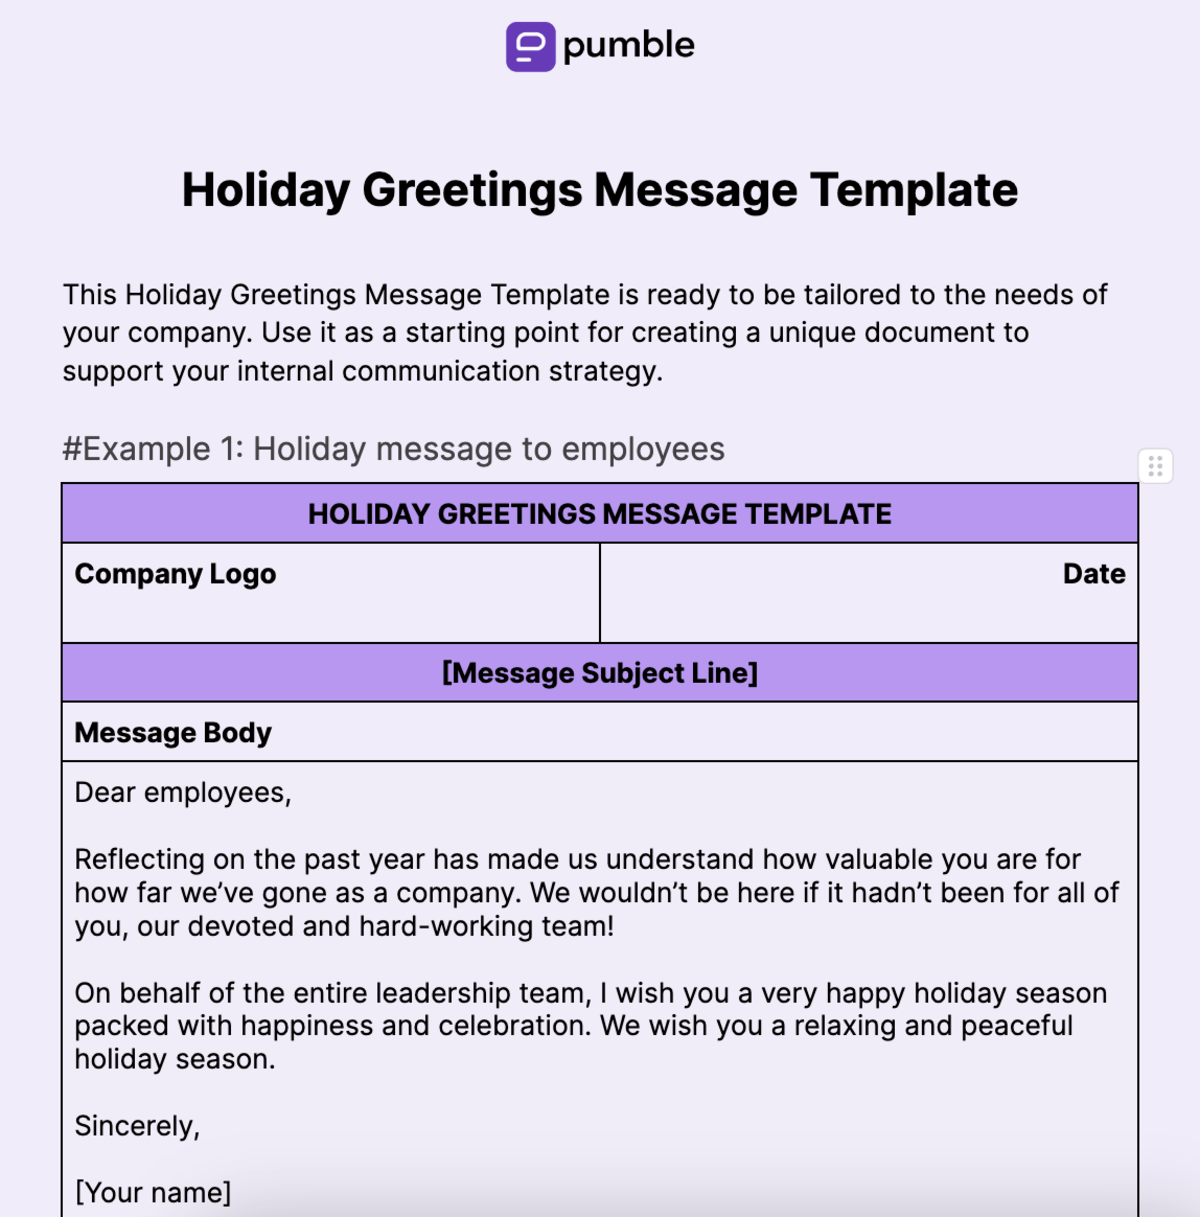 Holiday Greetings Message Template